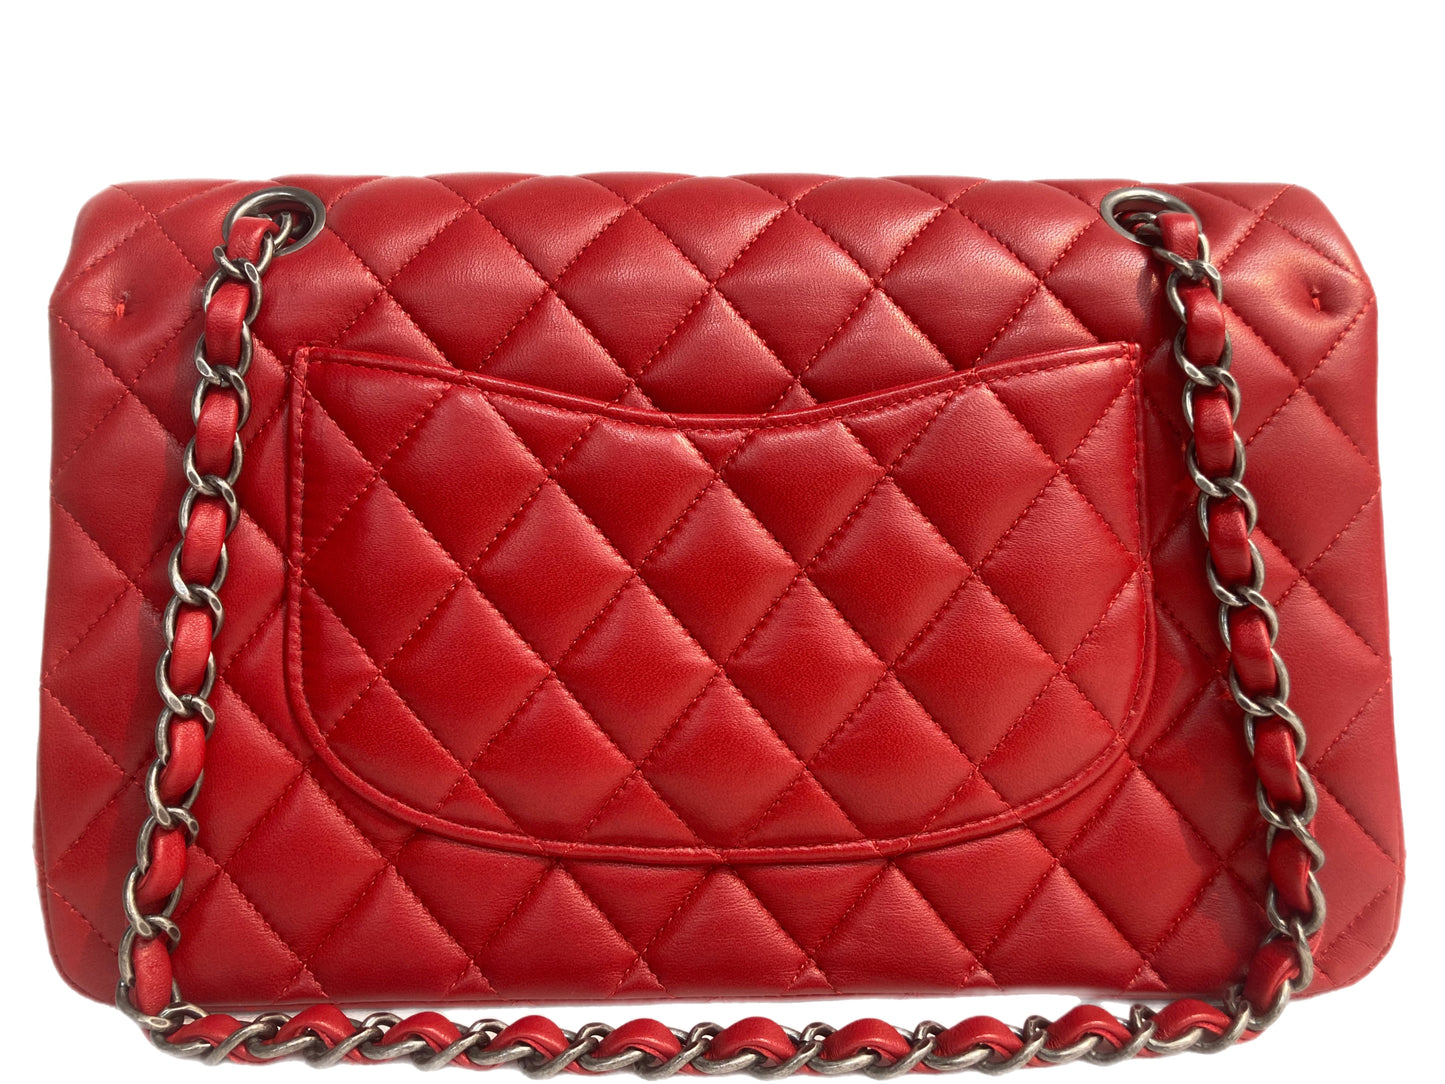 CHANEL Lambskin Leather Medium Double Flap Bag Red